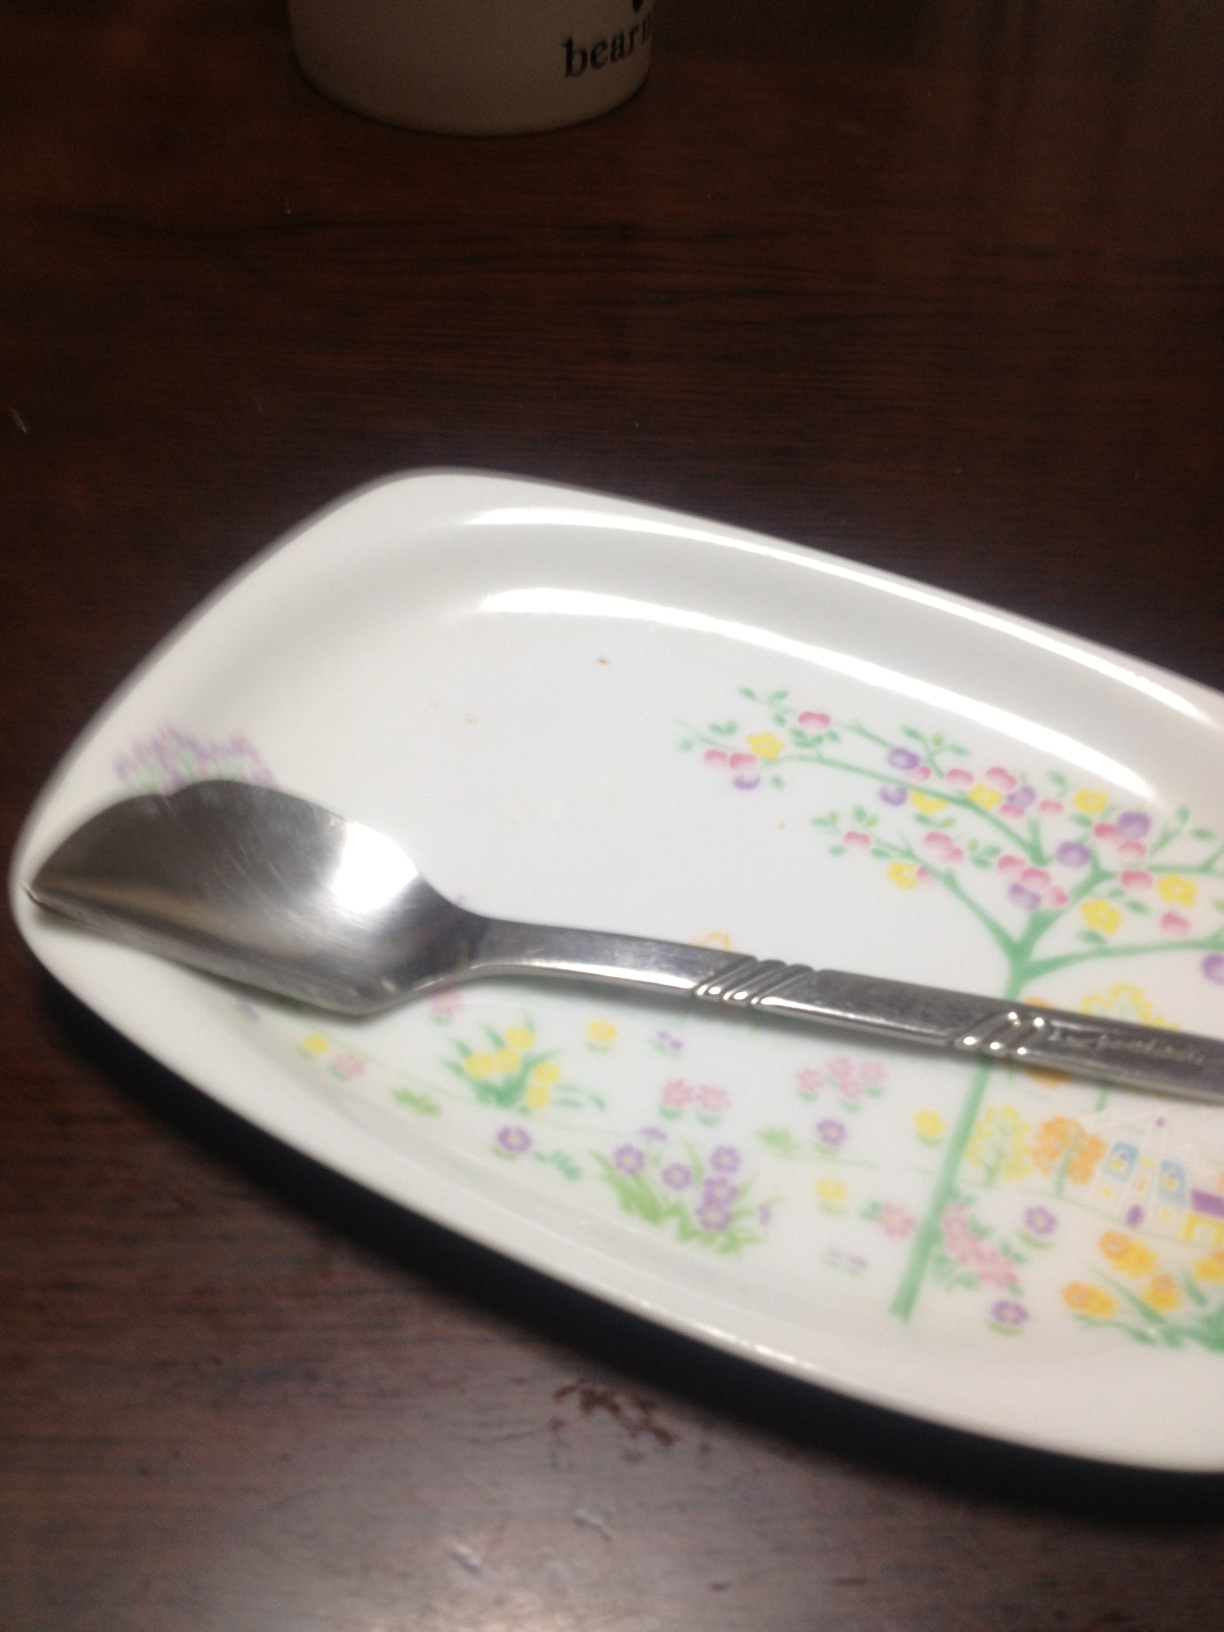 A photo captured by a person who is blind. A computer-generated caption for this photo is: A spoon and a fork on a plate.